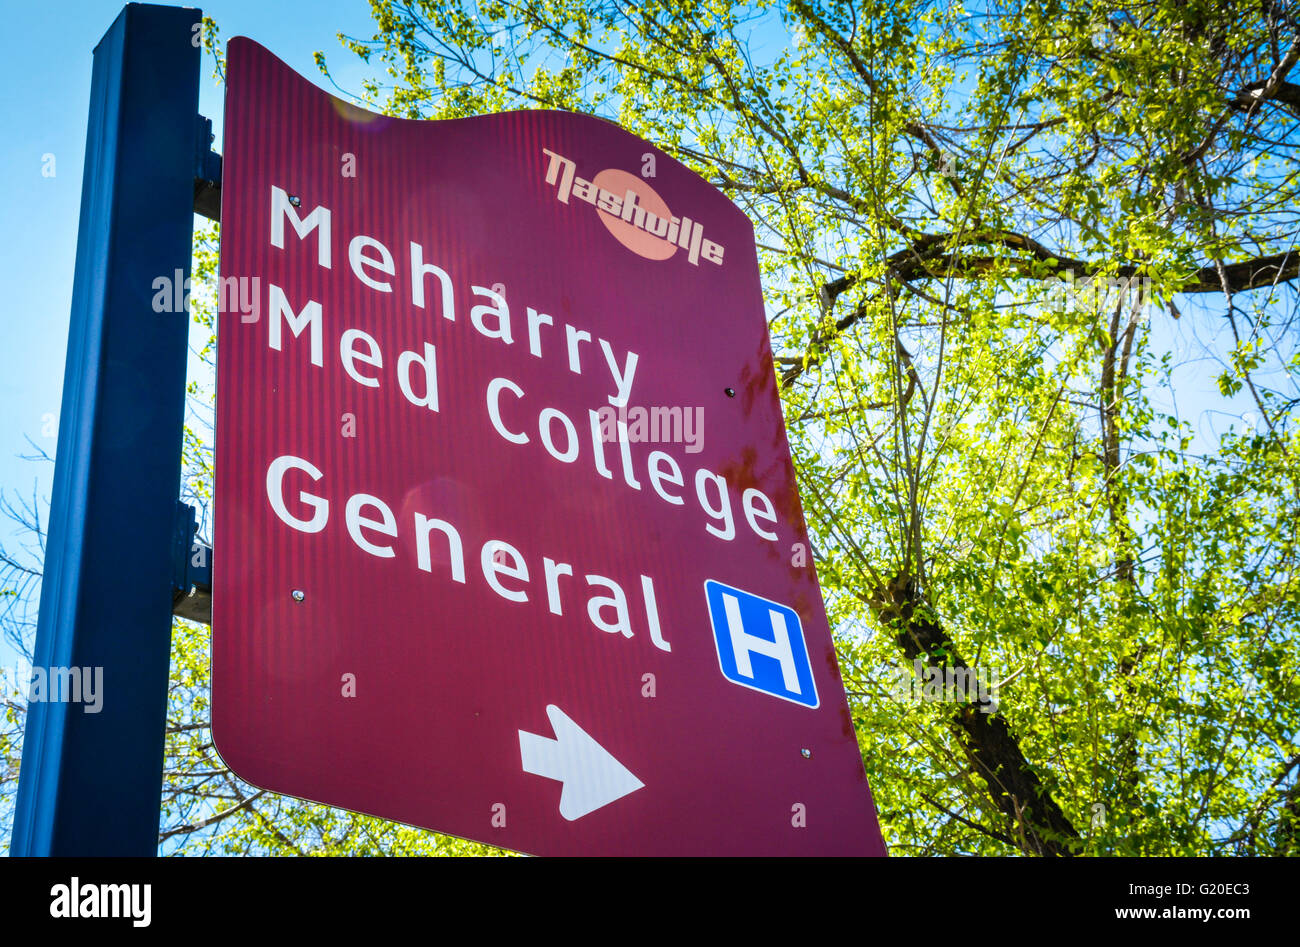 A red Nashville Street branded sign gives directions to the Meharry Medical College and the General Hospital in Nashville, TN Stock Photo